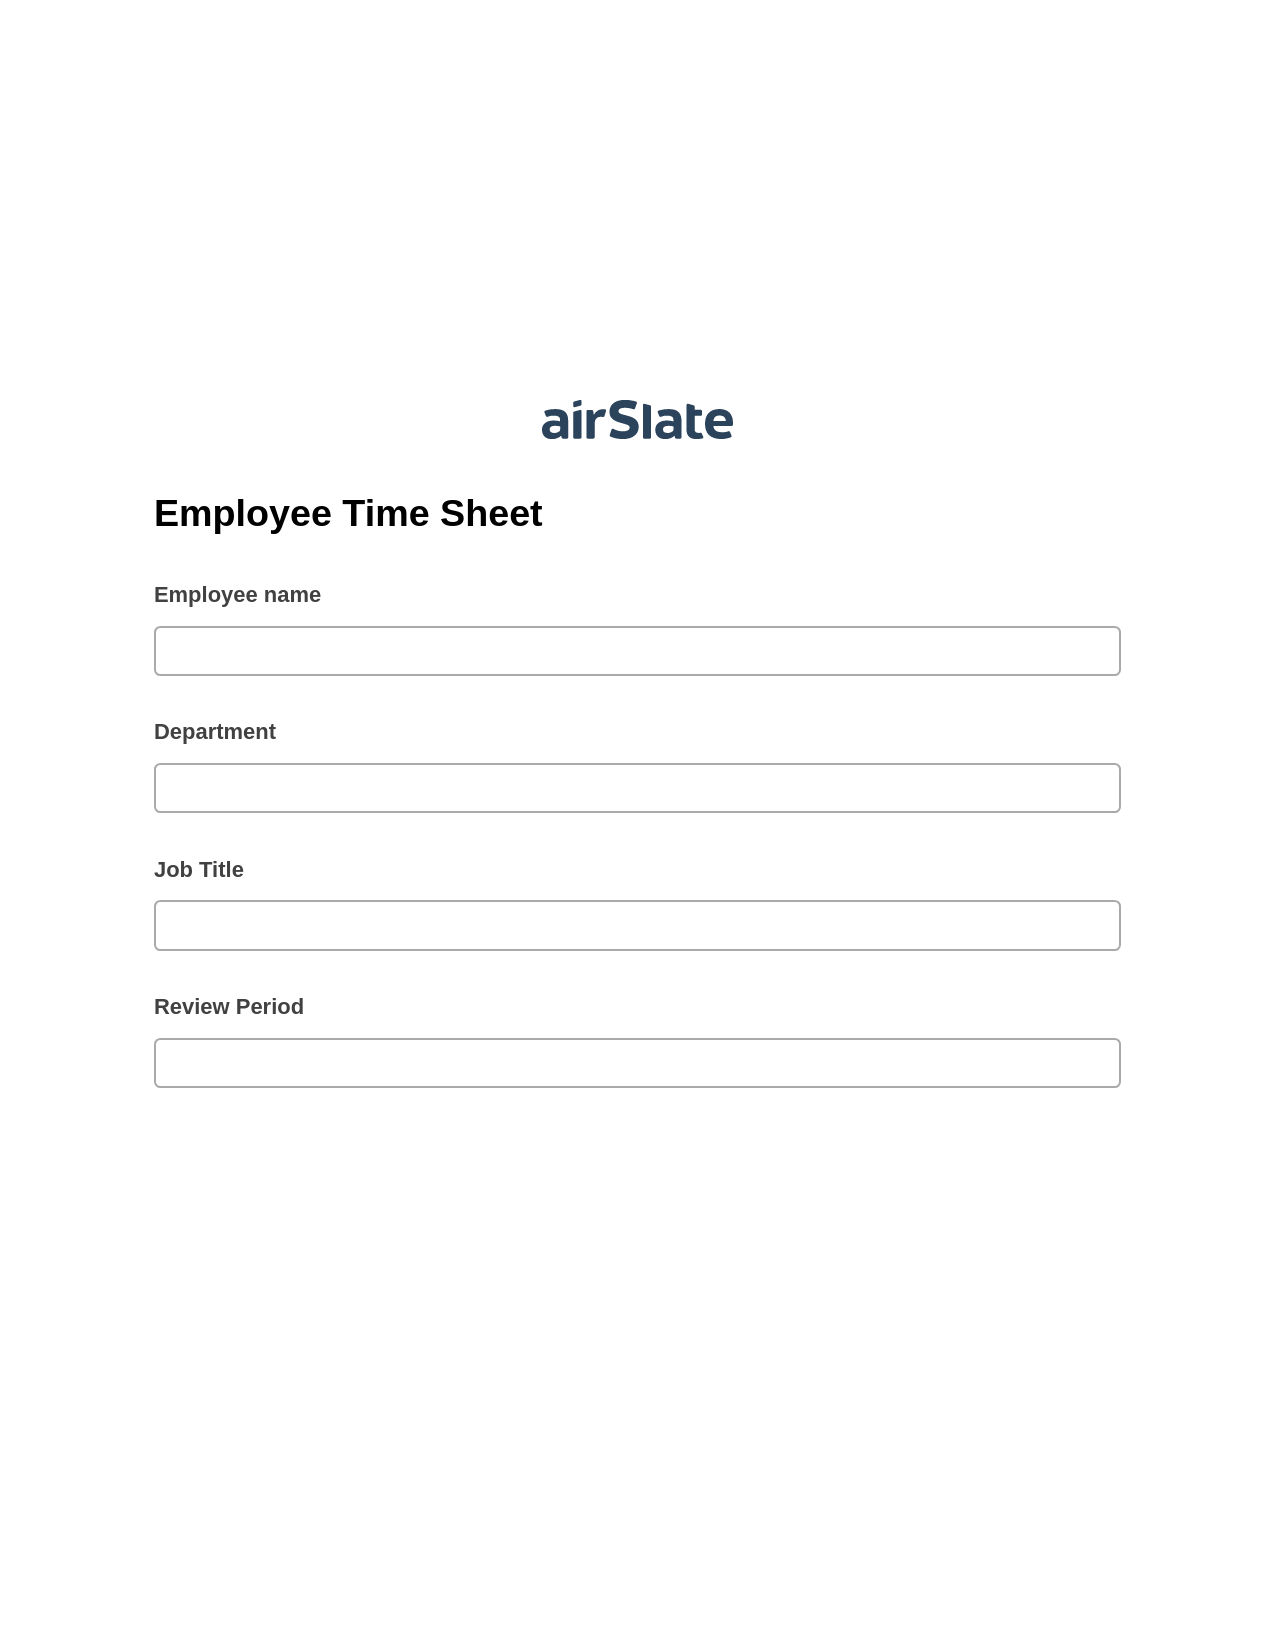 Employee Time Sheet Pre-fill from MS Dynamics 365 Records, Google Cloud Print Bot, Export to Smartsheet